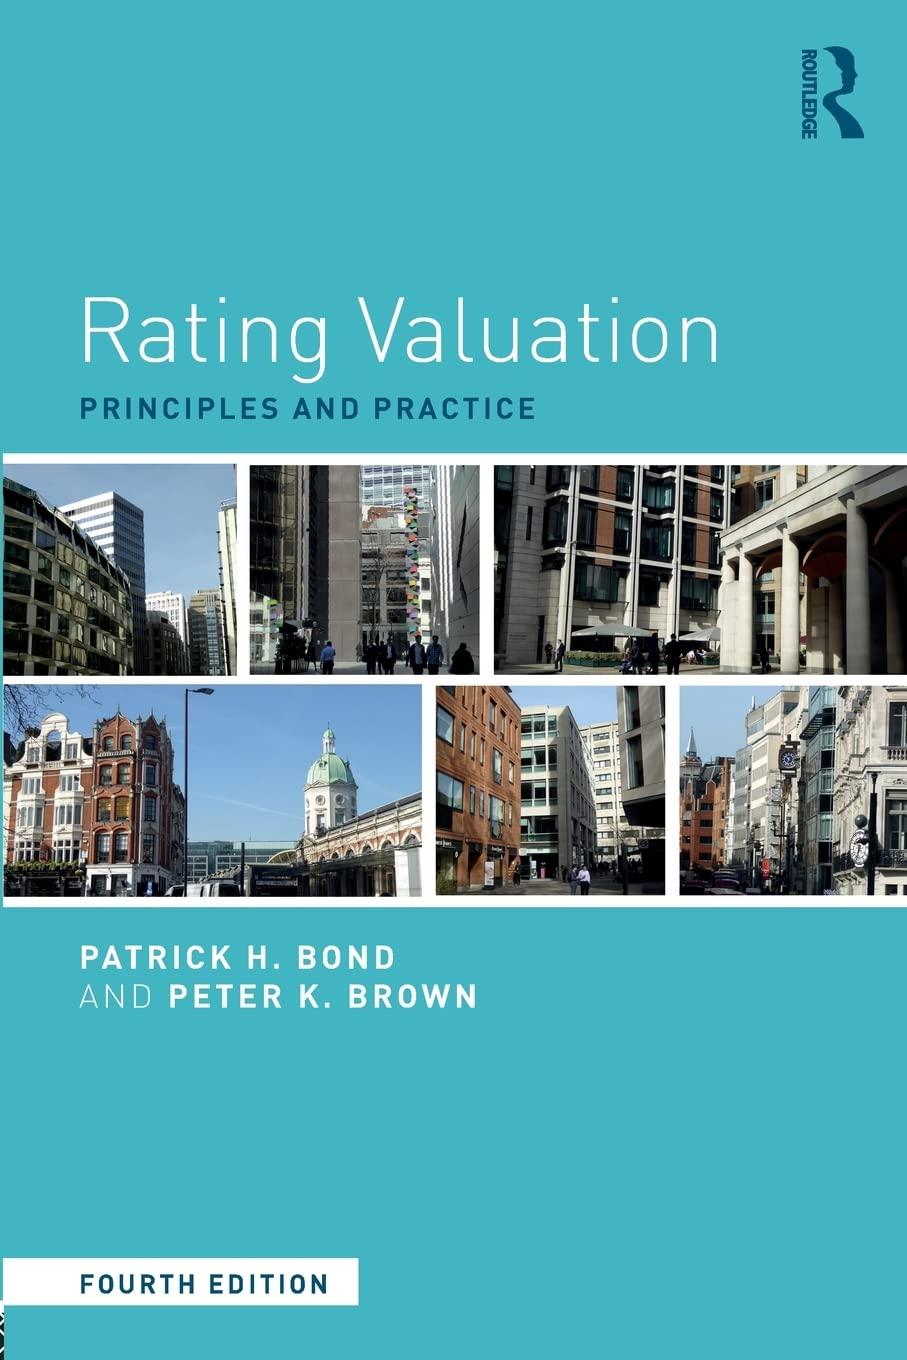 rating valuation principles and practice 4th edition patrick h. bond, peter k. brown 1138688894, 9781138688896